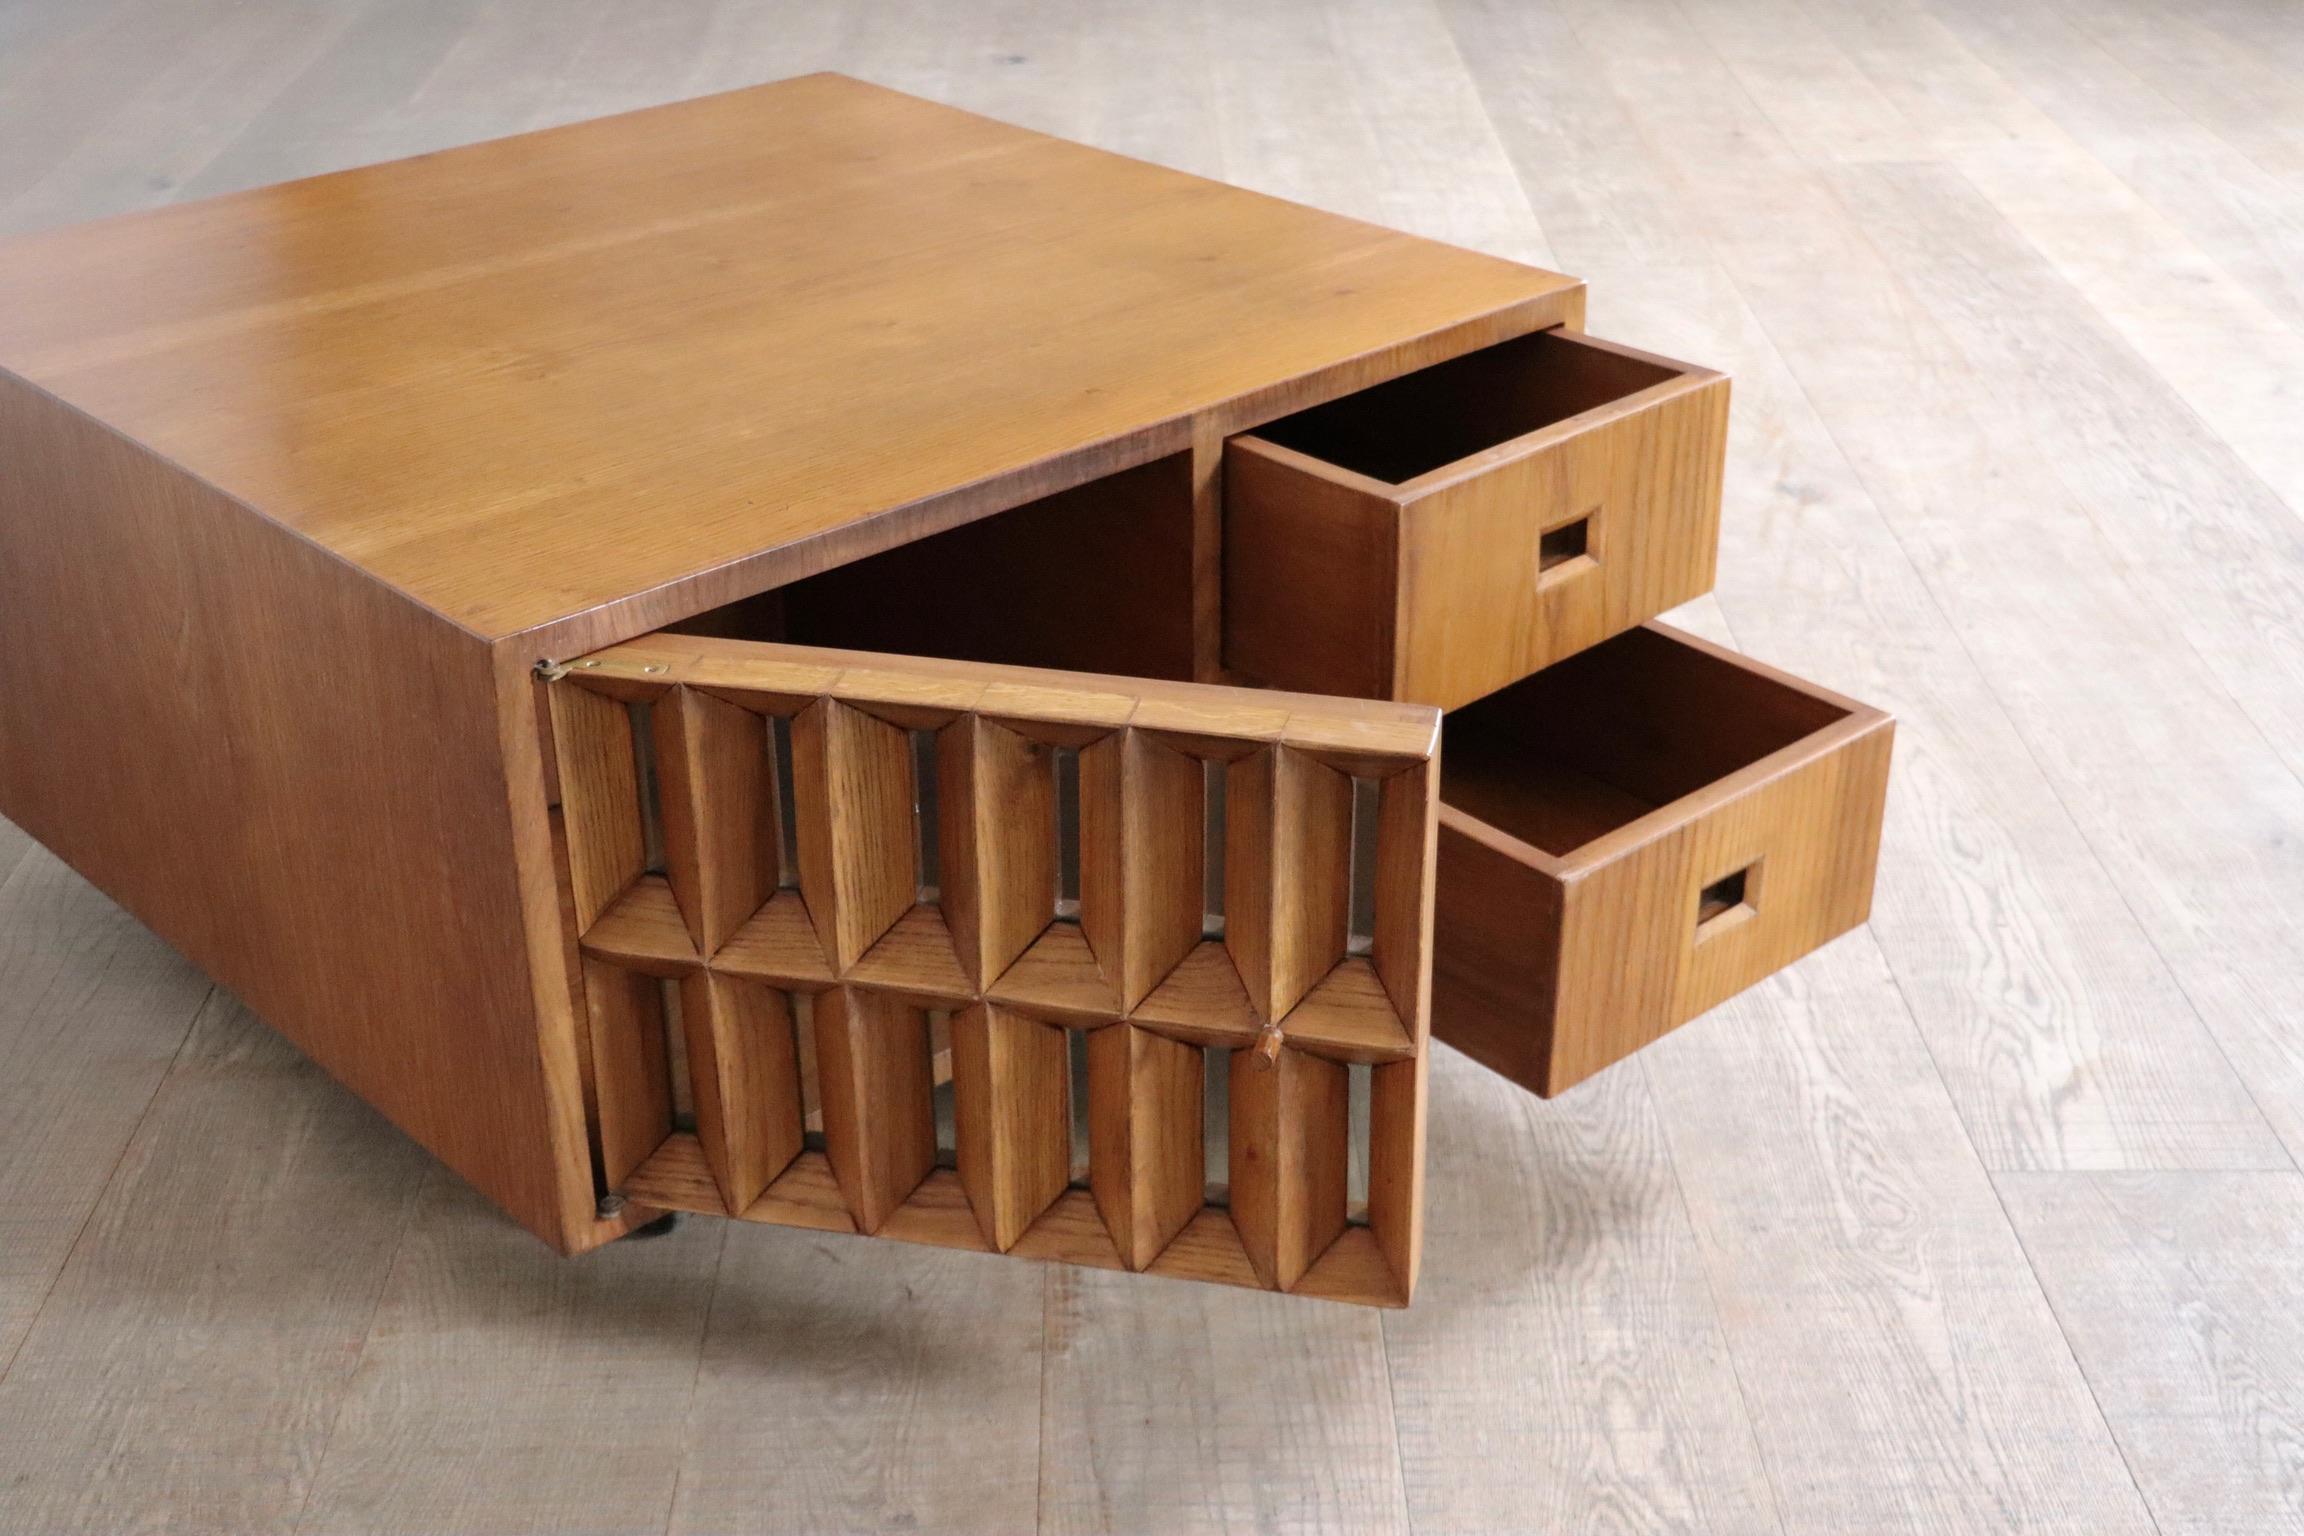 Giuseppe Rivadossi Coffee Table In Oak With Glass Framed Doors, Italy 1975 4